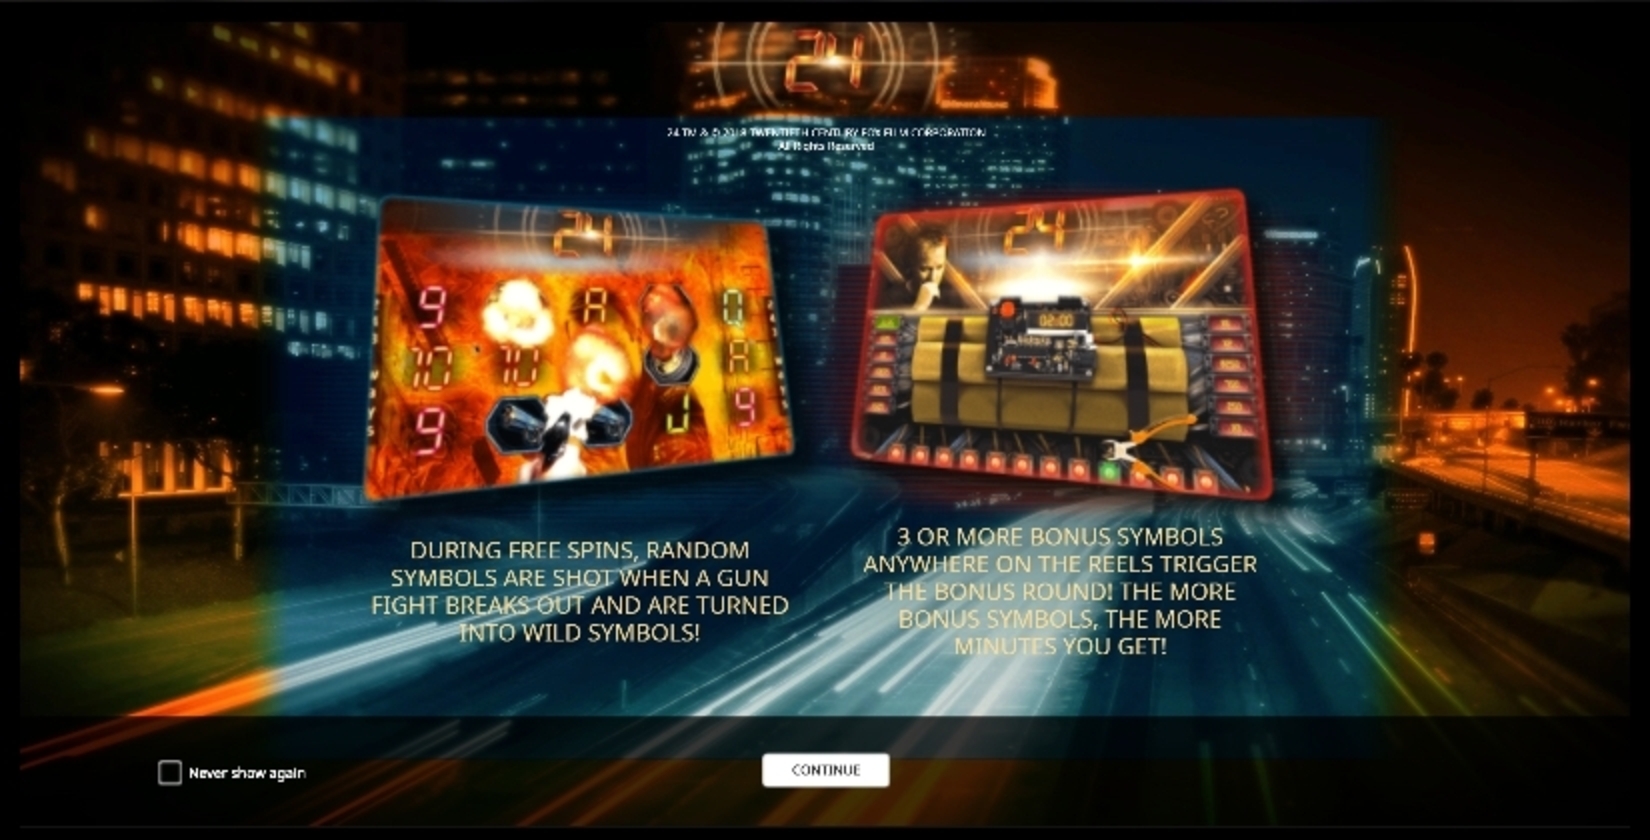 Play 24 Free Casino Slot Game by iSoftBet